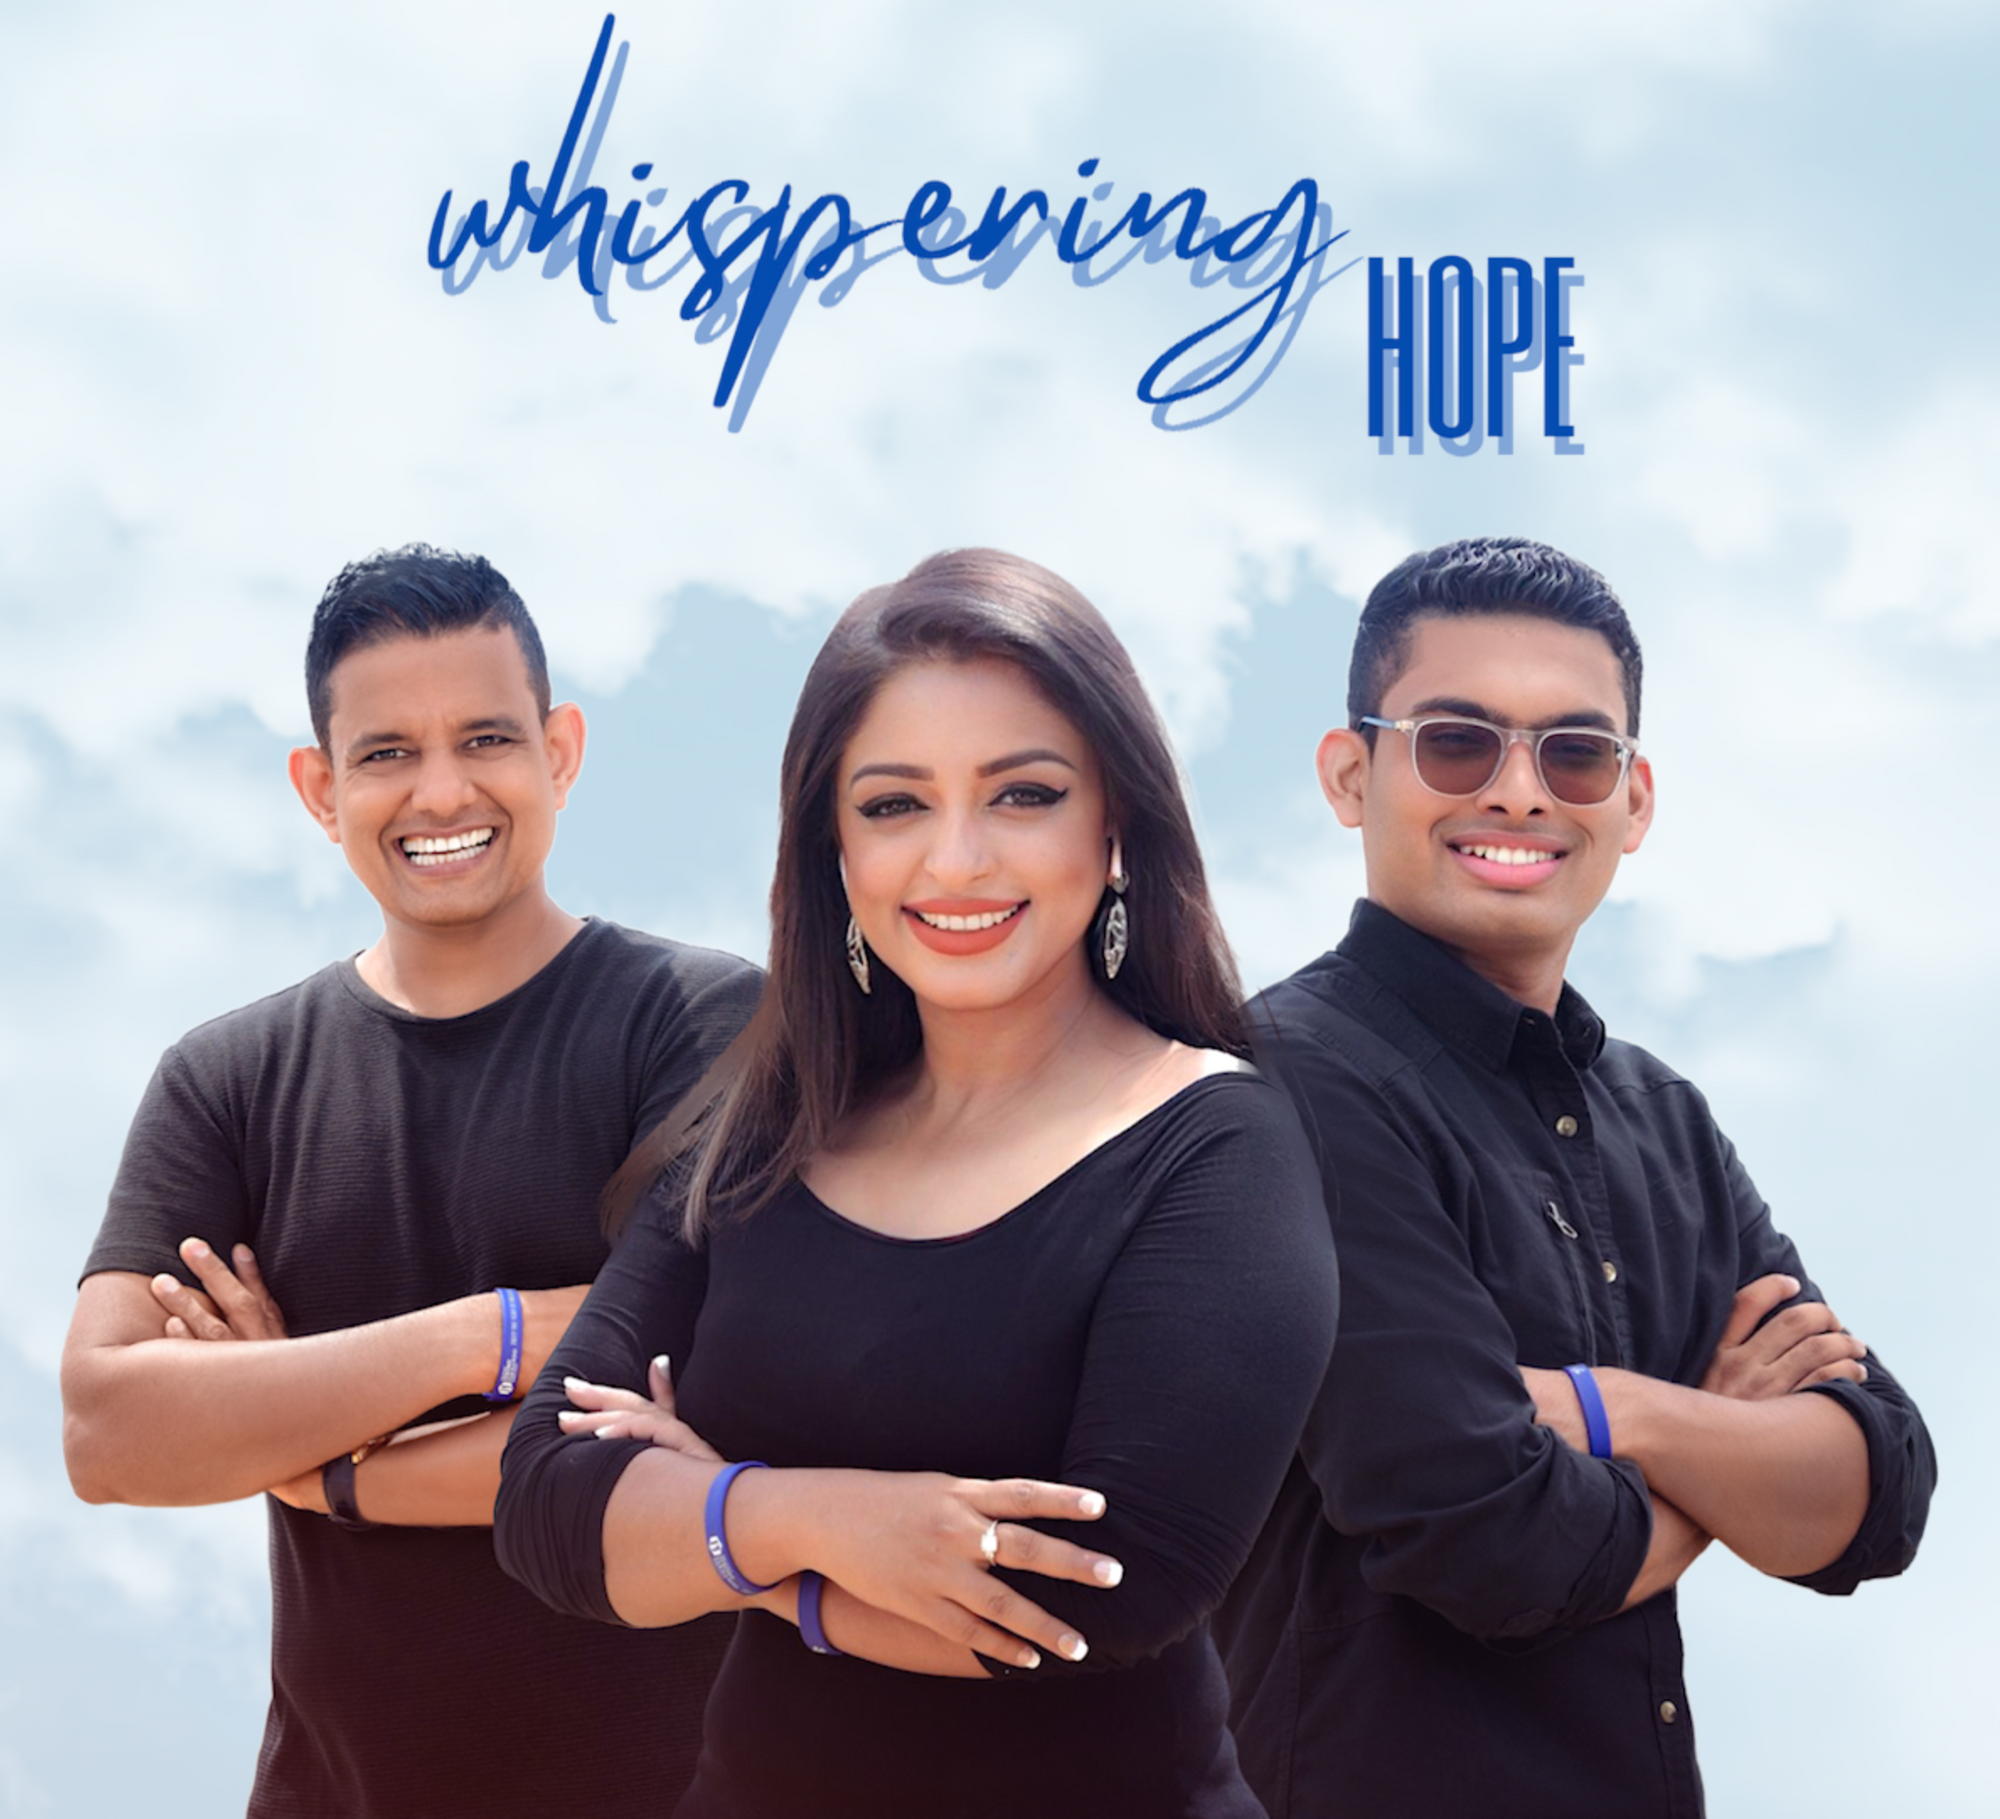 Gresha Schuilling celebrates her faith and journey in 'whispering HOPE'